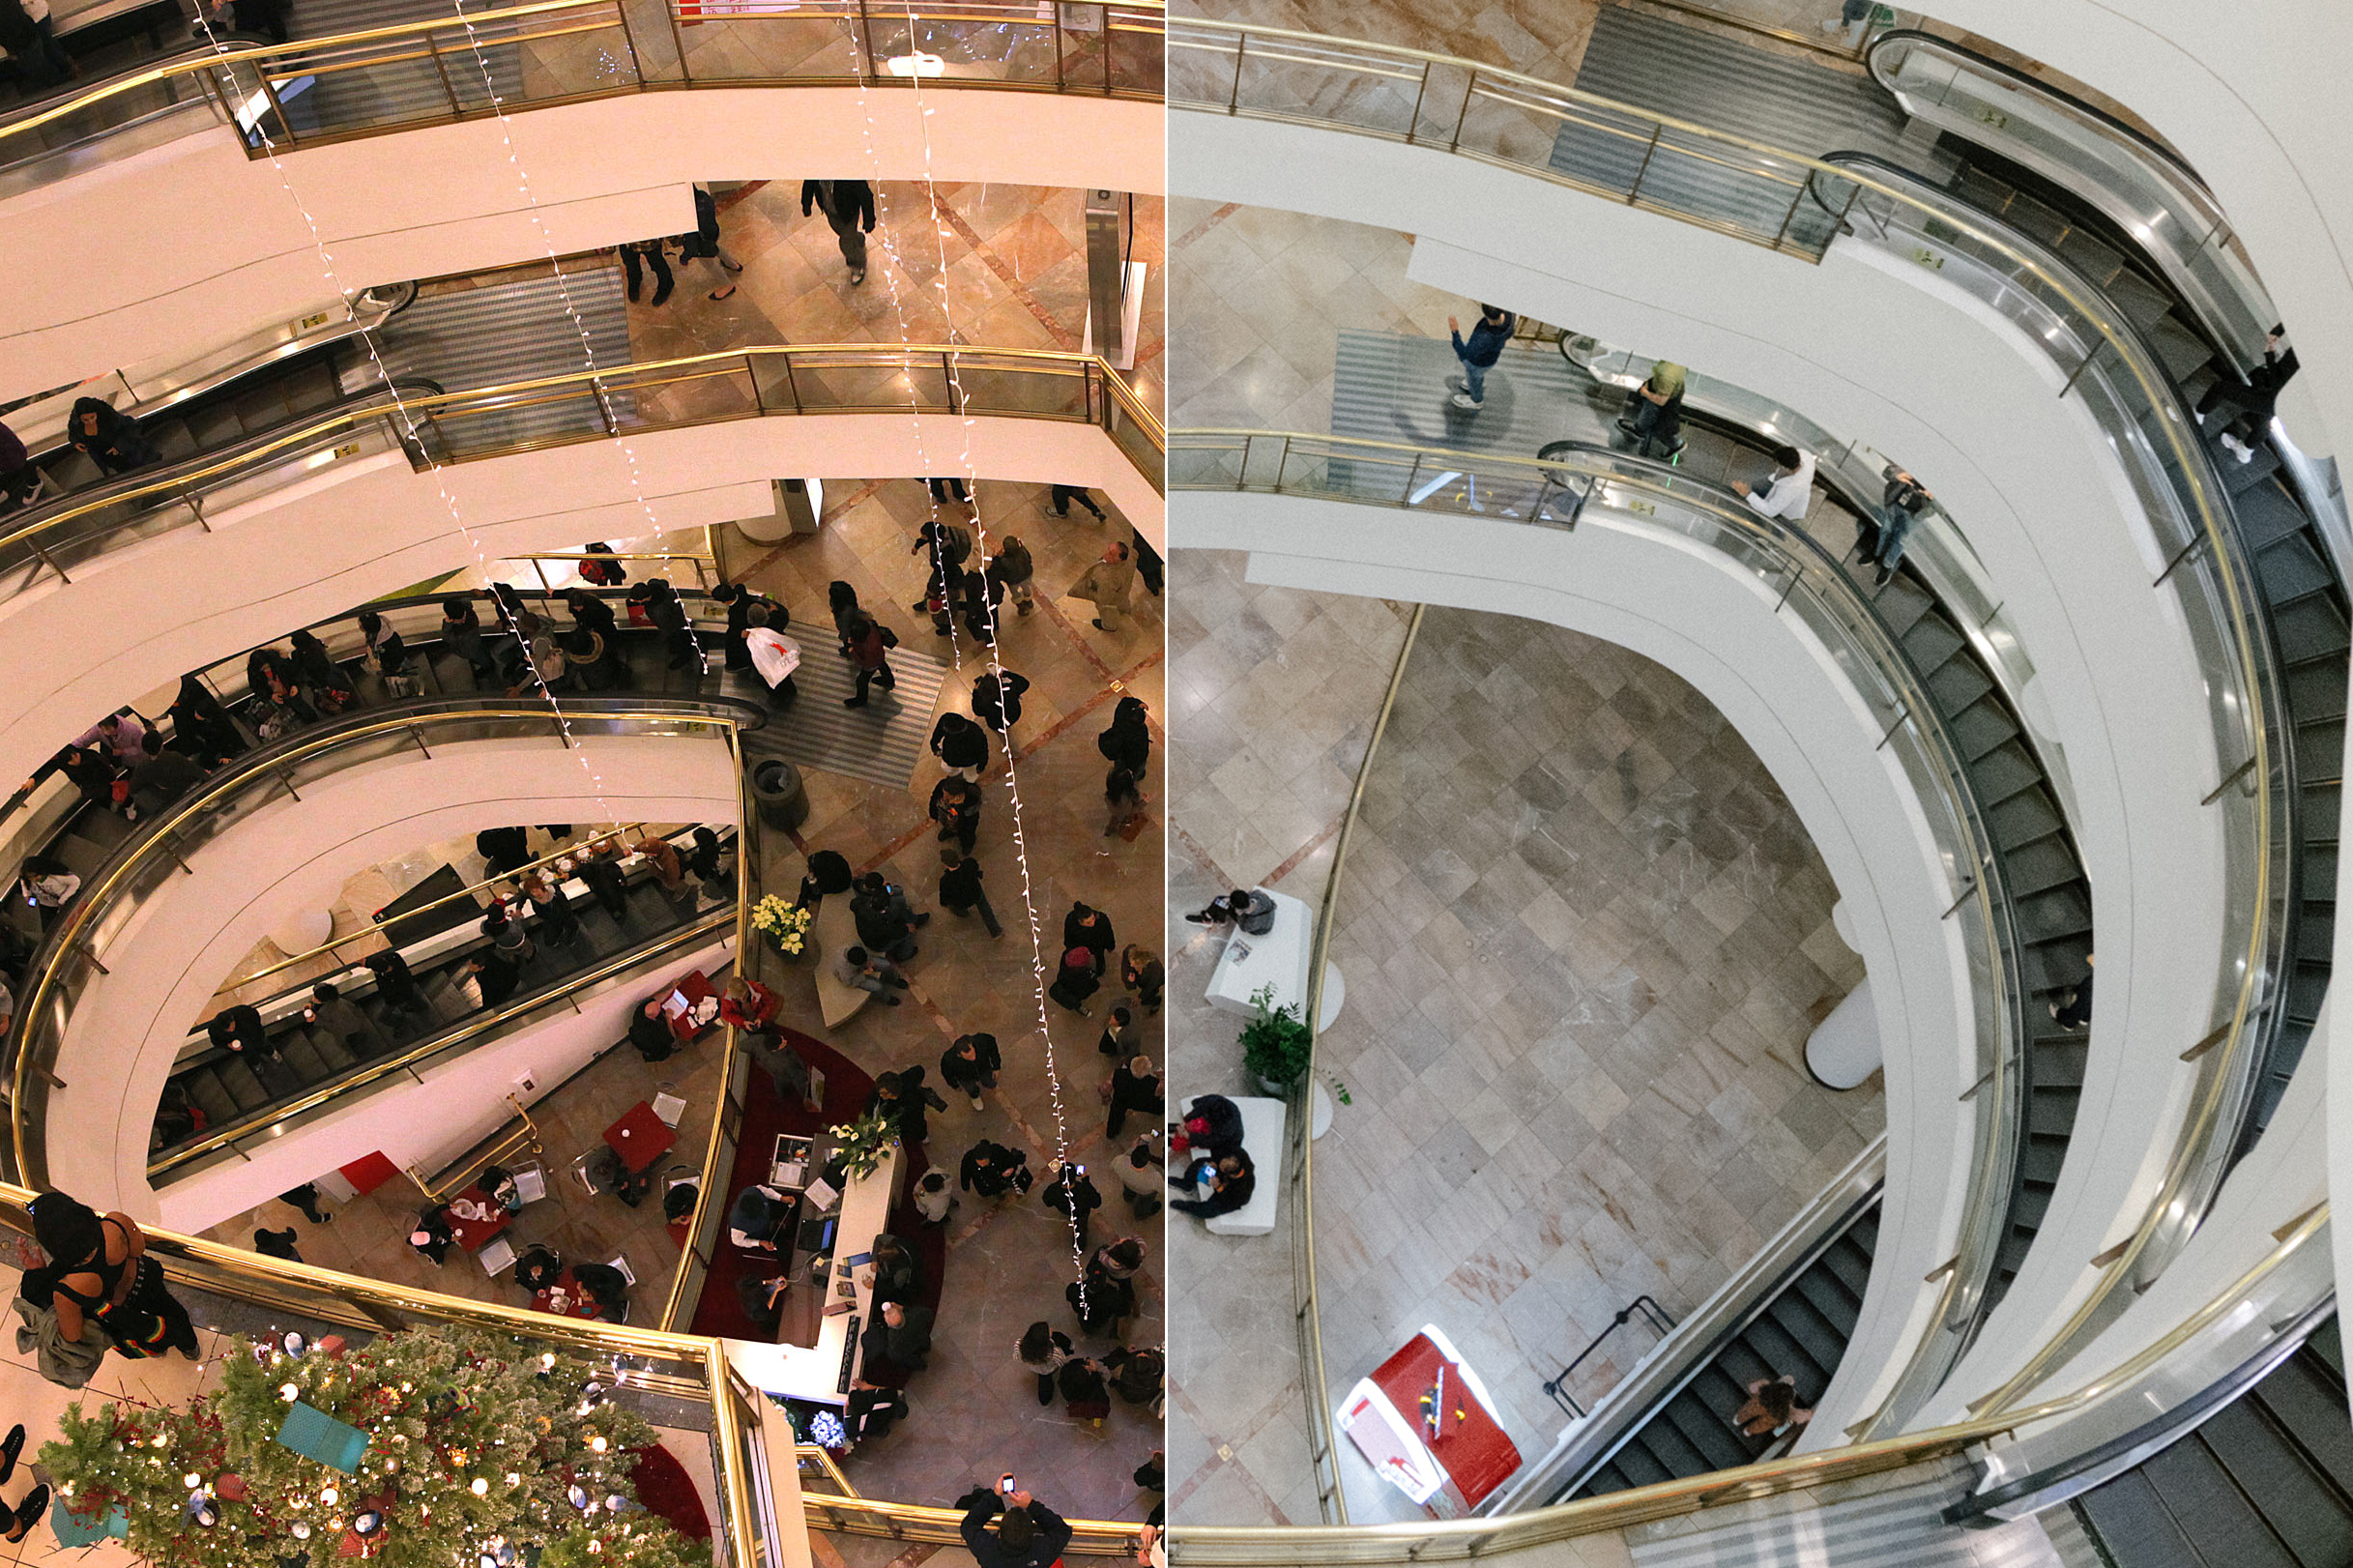 A split-view of a shopping mall's interior showing curved escalators from above, bustling with shoppers and café goers.